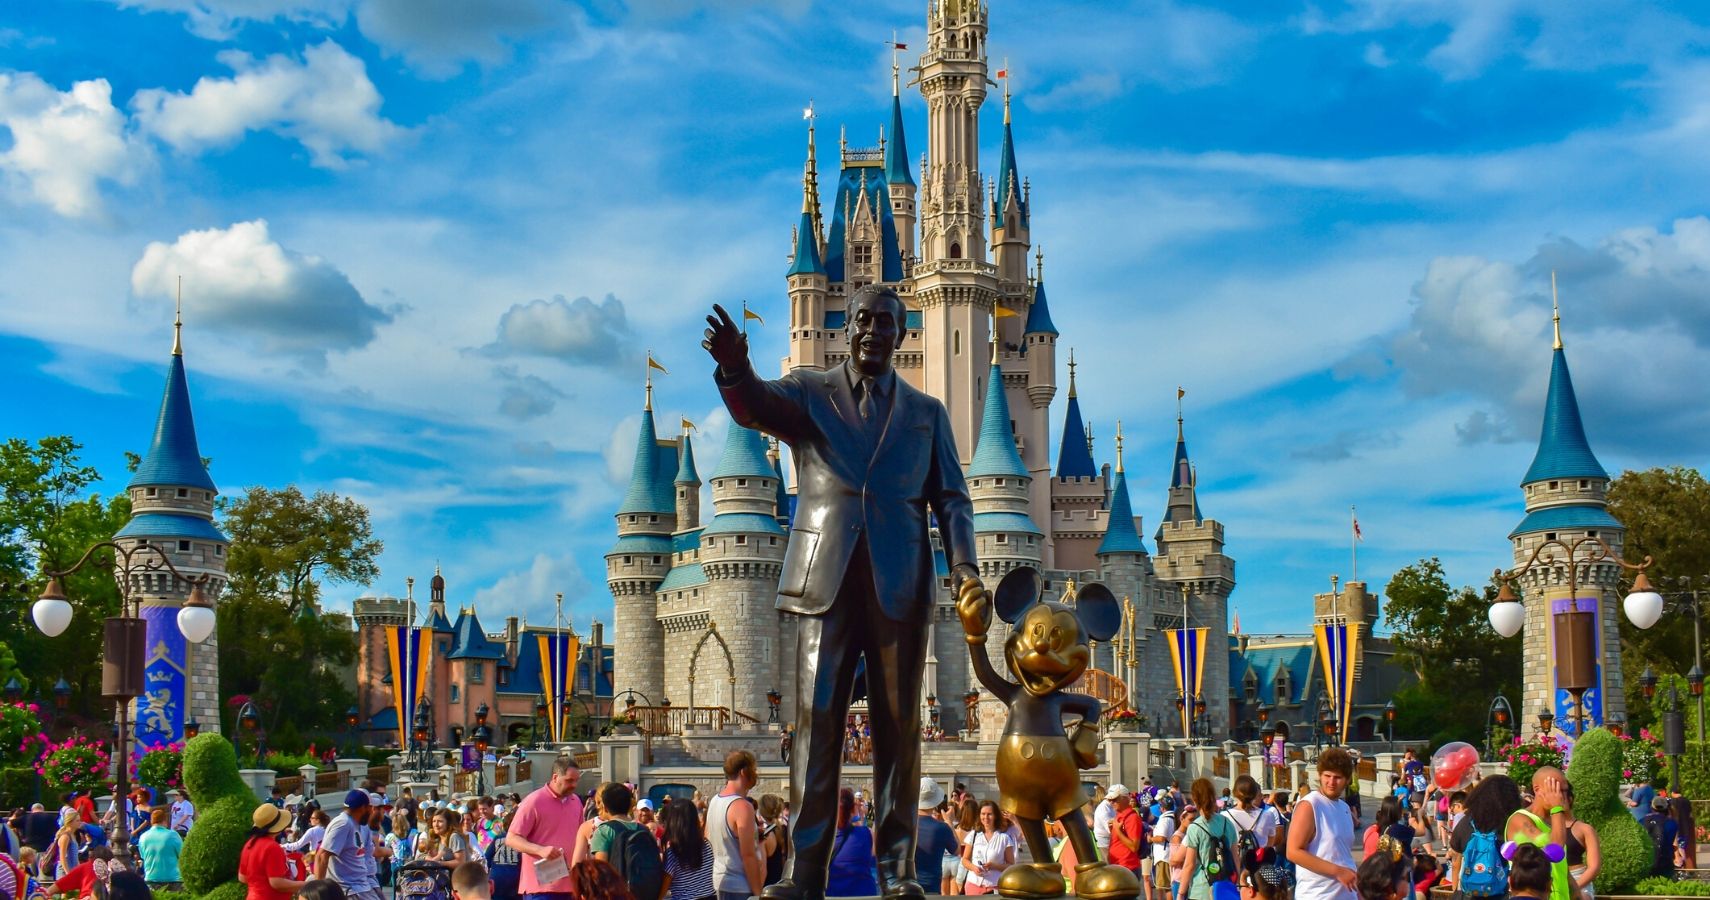 Disney Parks: The 10 Biggest Hollywood Studios Attractions Based On A Movie